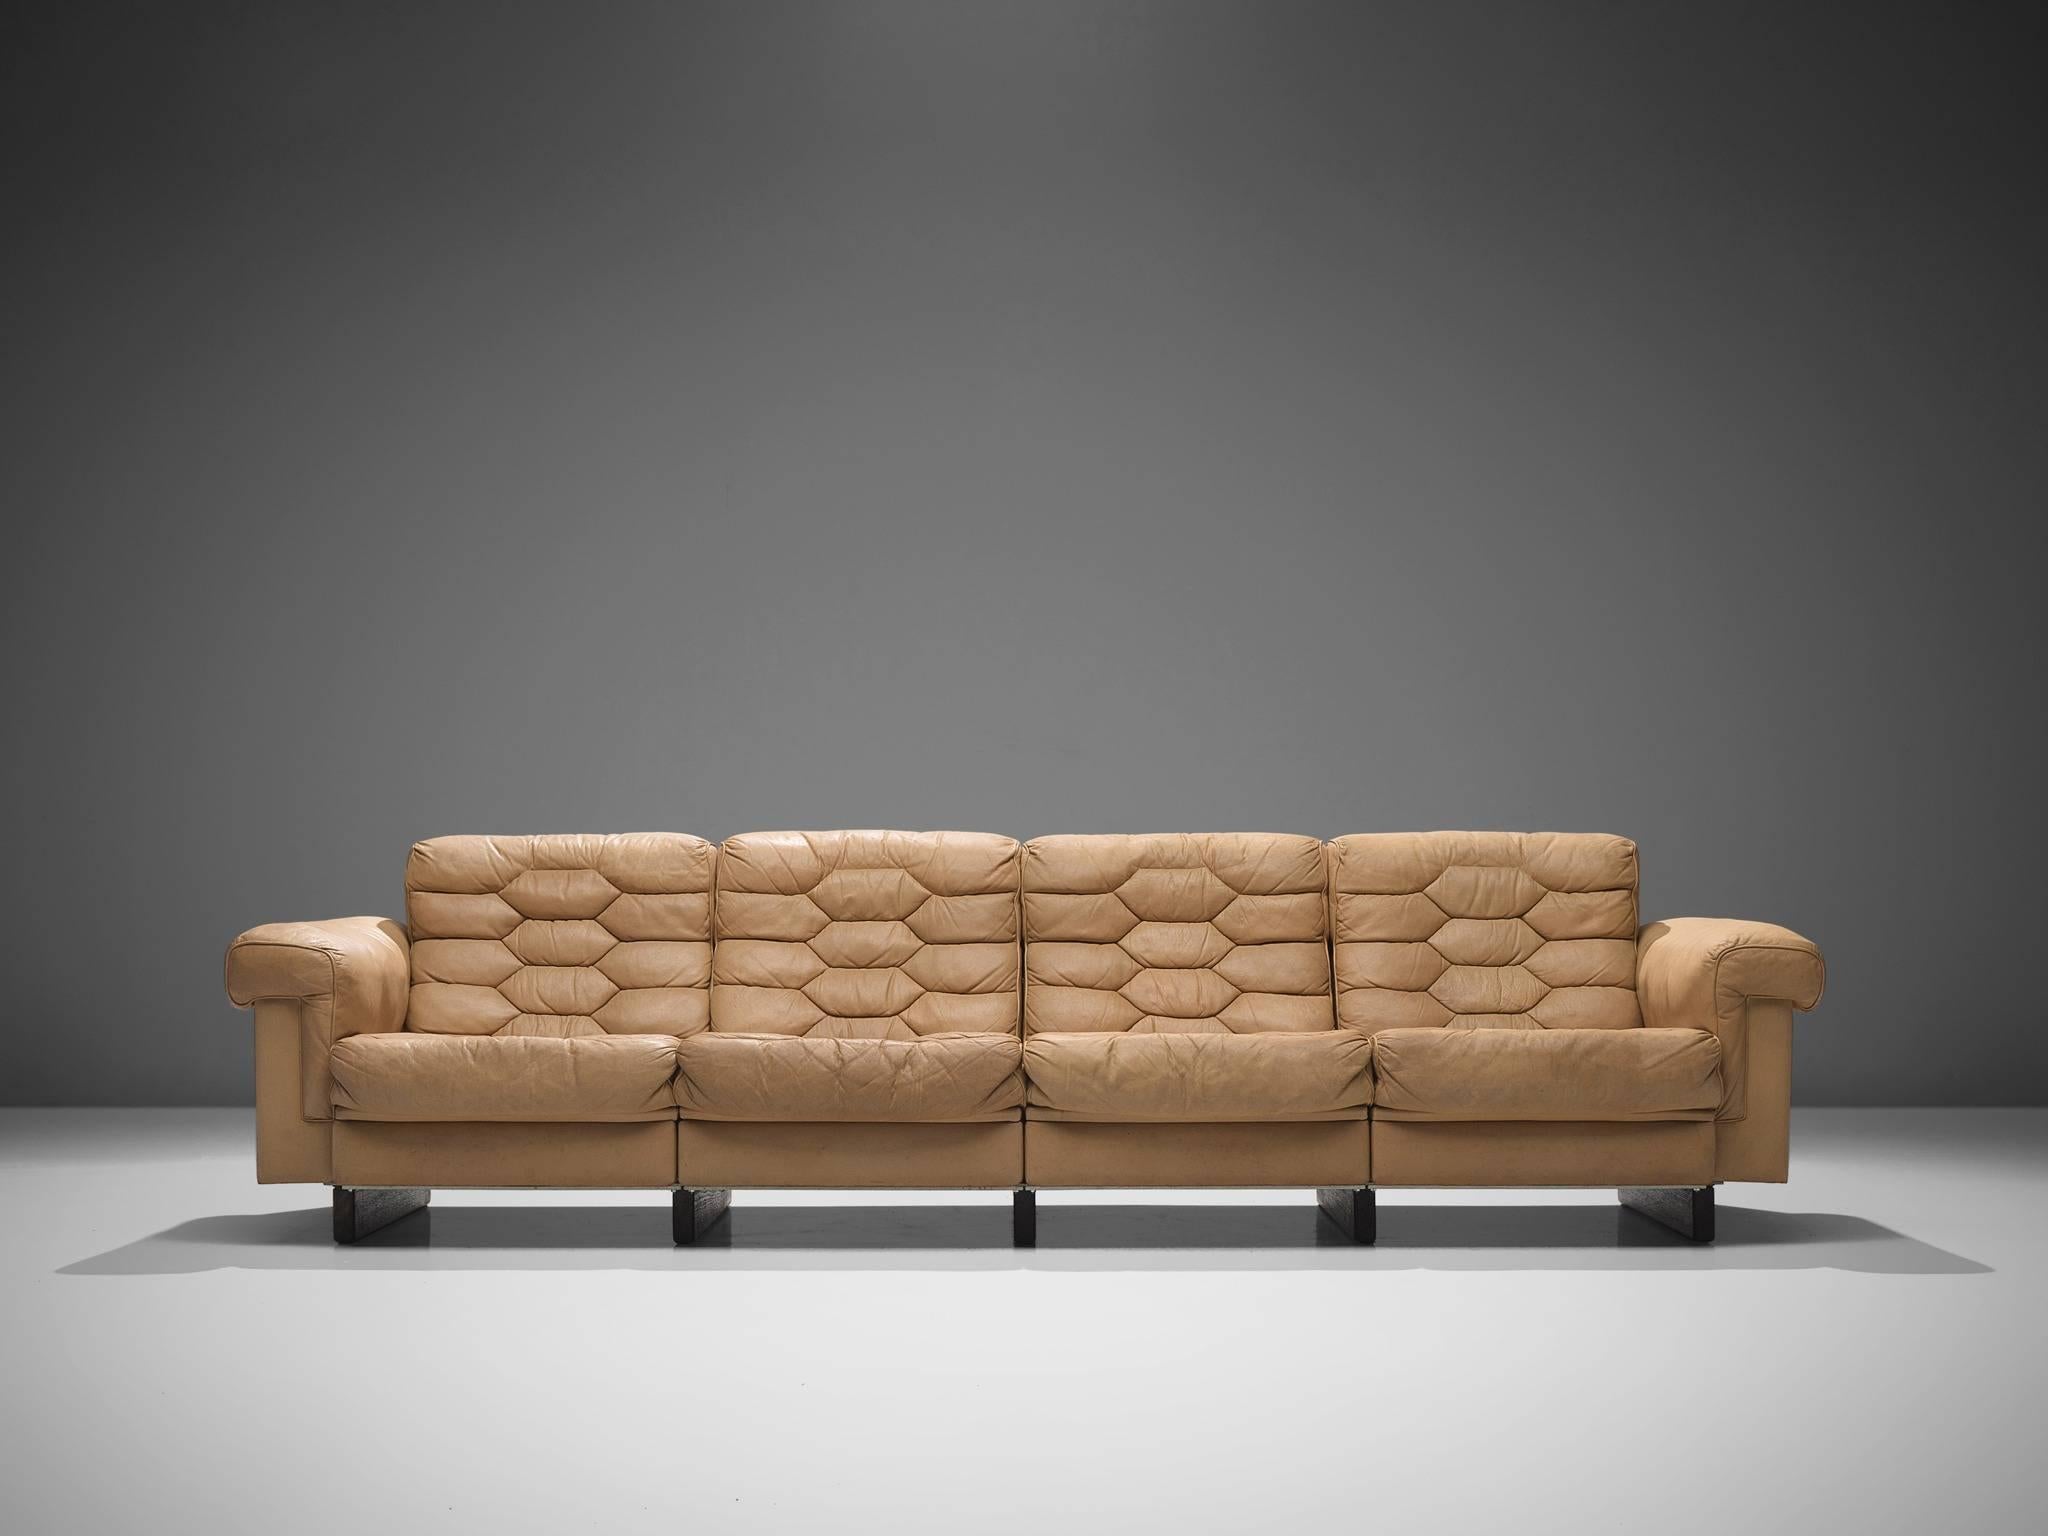 Robert Haussmann for De Sede, four-seat sofa, cognac leather, 1960s.

This sofa is designed by Robert Haussmann for De Sede. The piece defines itself by diamond, honeycomb shaped tufted sections that are visible on seats and backs. The sofa is